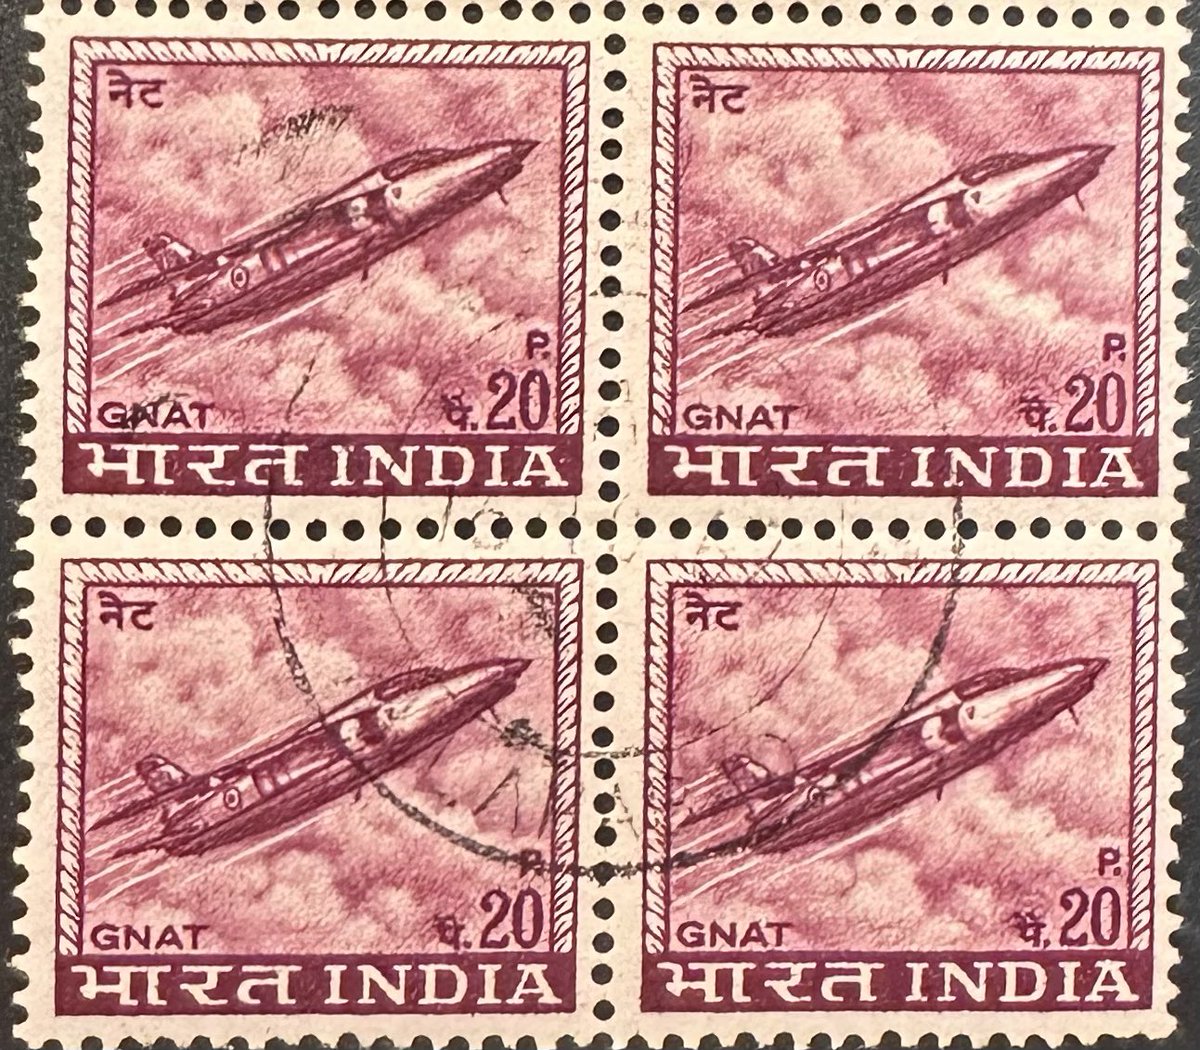 Today’s India stamp is the 20p definitive stamp featuring the Gnat/Ajeet aircraft. This 4th series stamp was issued in 1967.

#philately 
#stampcollecting 
#IndiaPost 
#Commonwealth 
#postalmuseum 
#APS_stamps
#TheRPSL